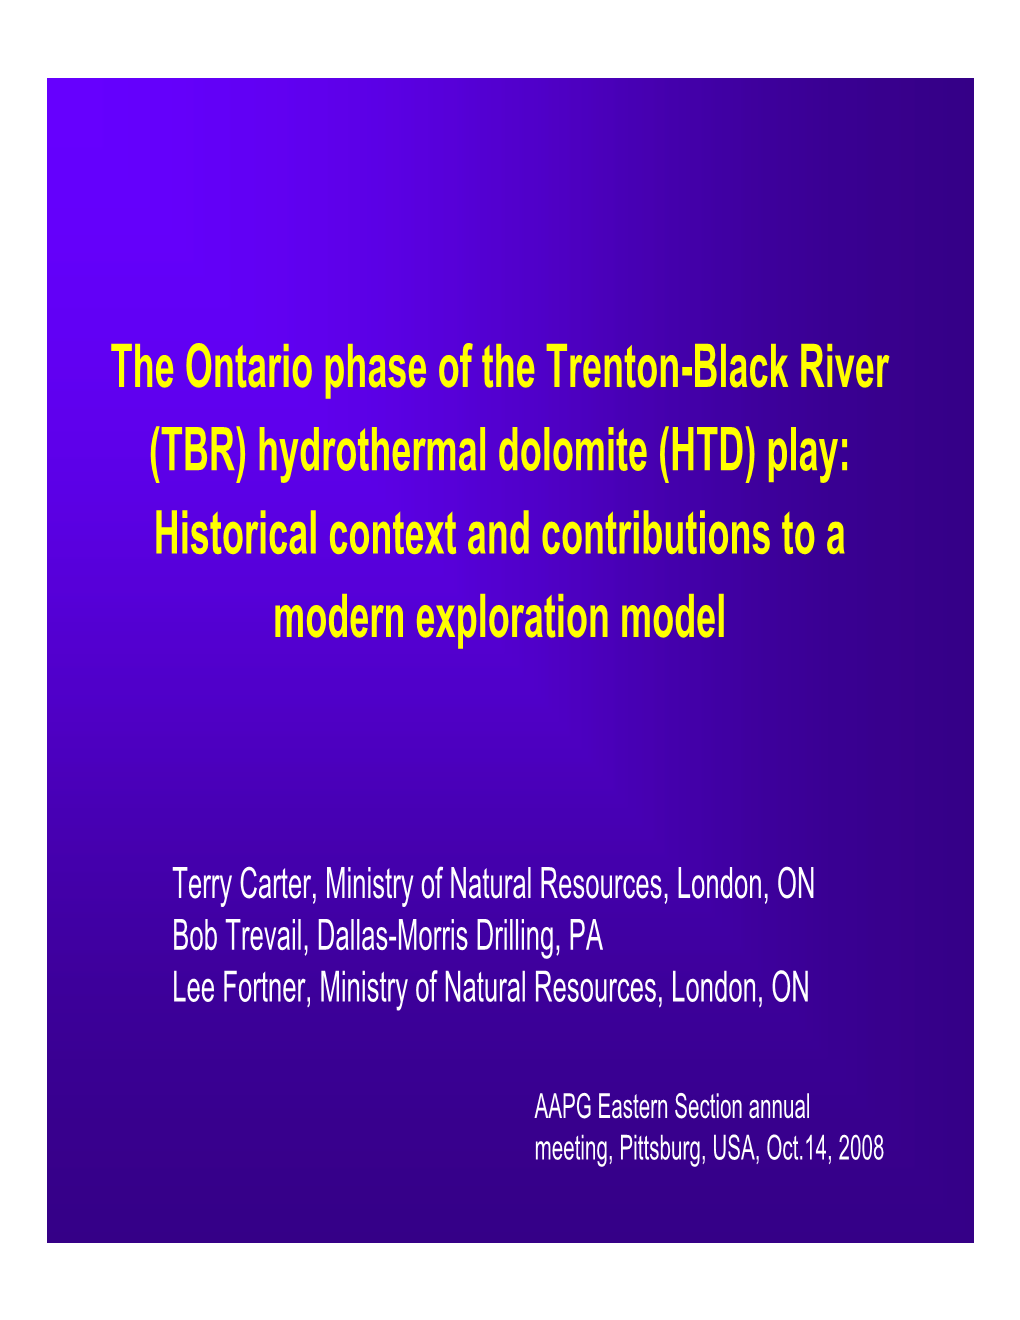 The Ontario Phase of the Trenton-Black River (TBR) Hydrothermal Dolomite (HTD) Play: Historical Context and Contributions to a Modern Exploration Model